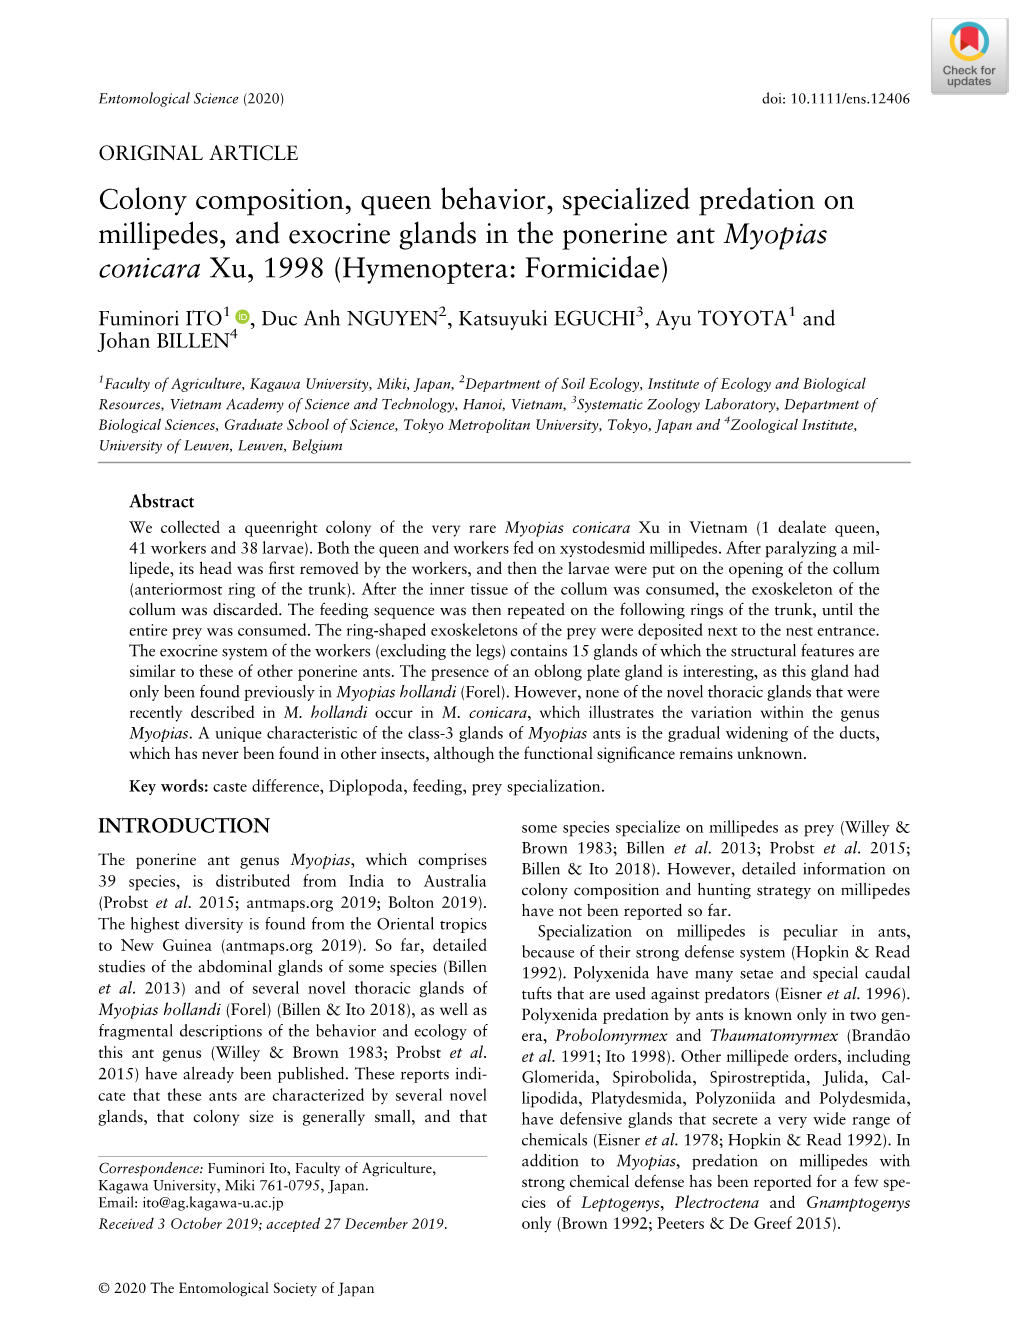 Colony Composition, Queen Behavior, Specialized Predation on Millipedes, and Exocrine Glands in the Ponerine Ant Myopias Conicara Xu, 1998 (Hymenoptera: Formicidae)